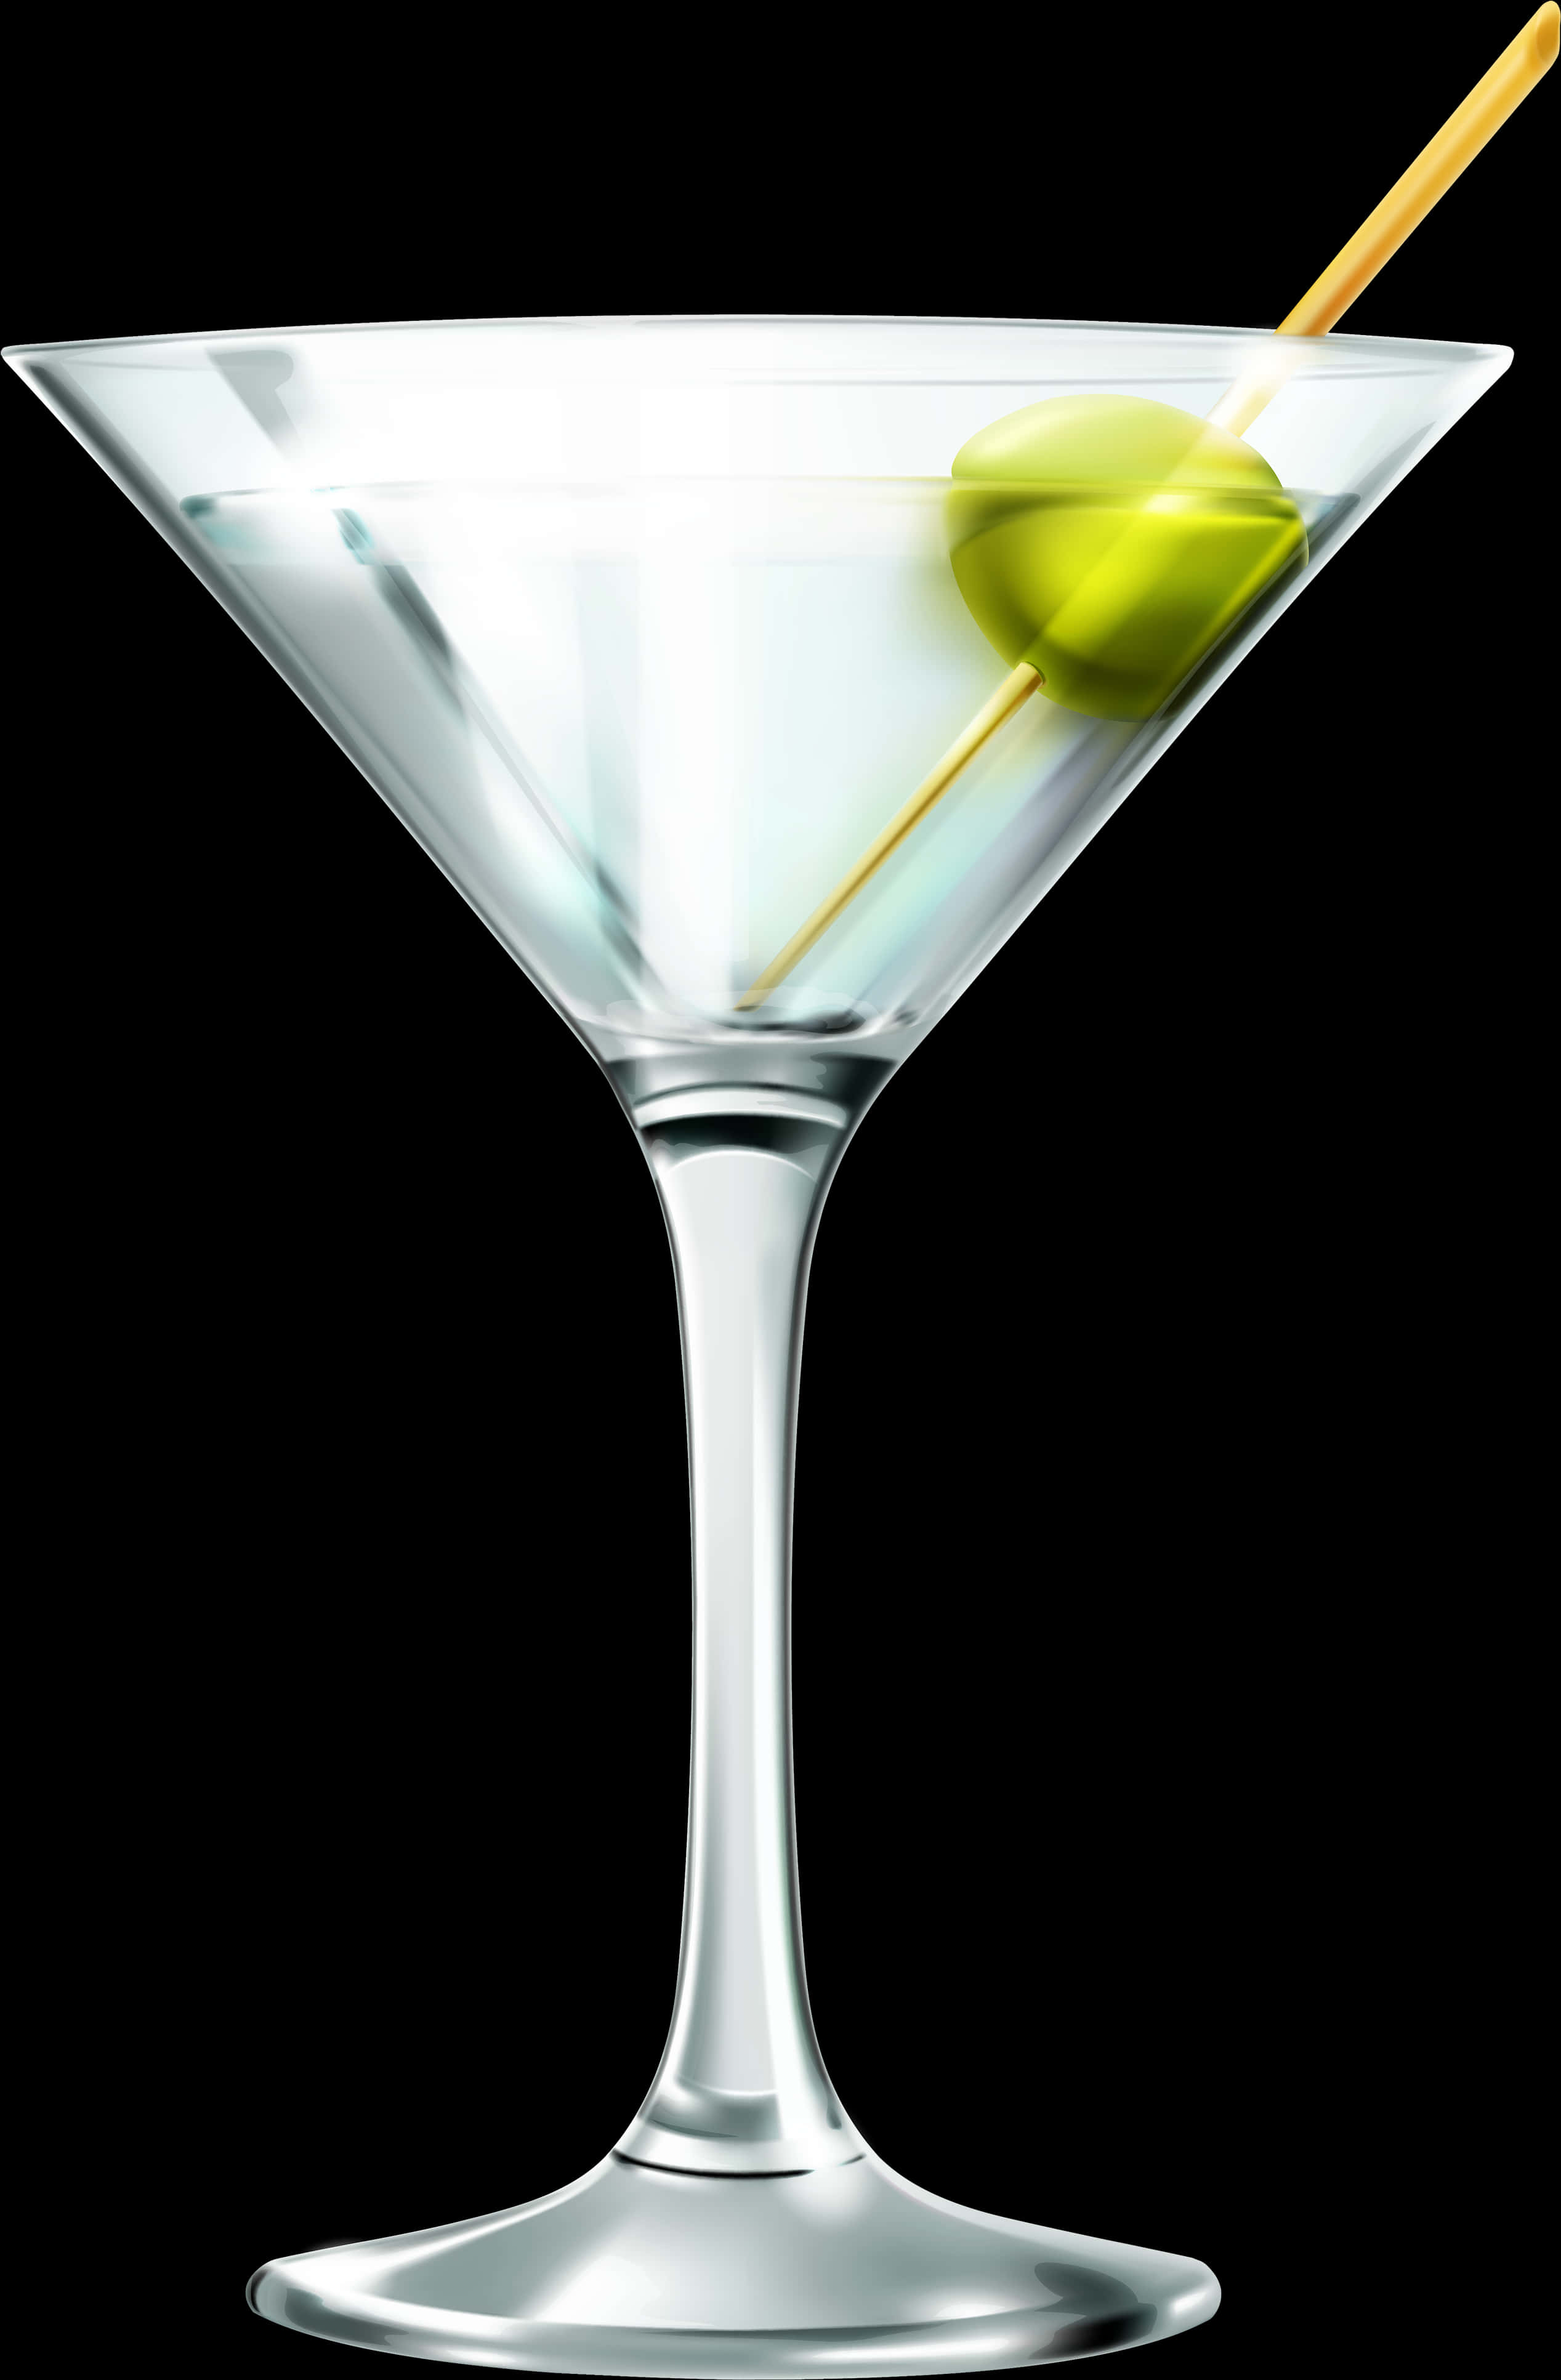 A Glass With A Martini And Olive On It